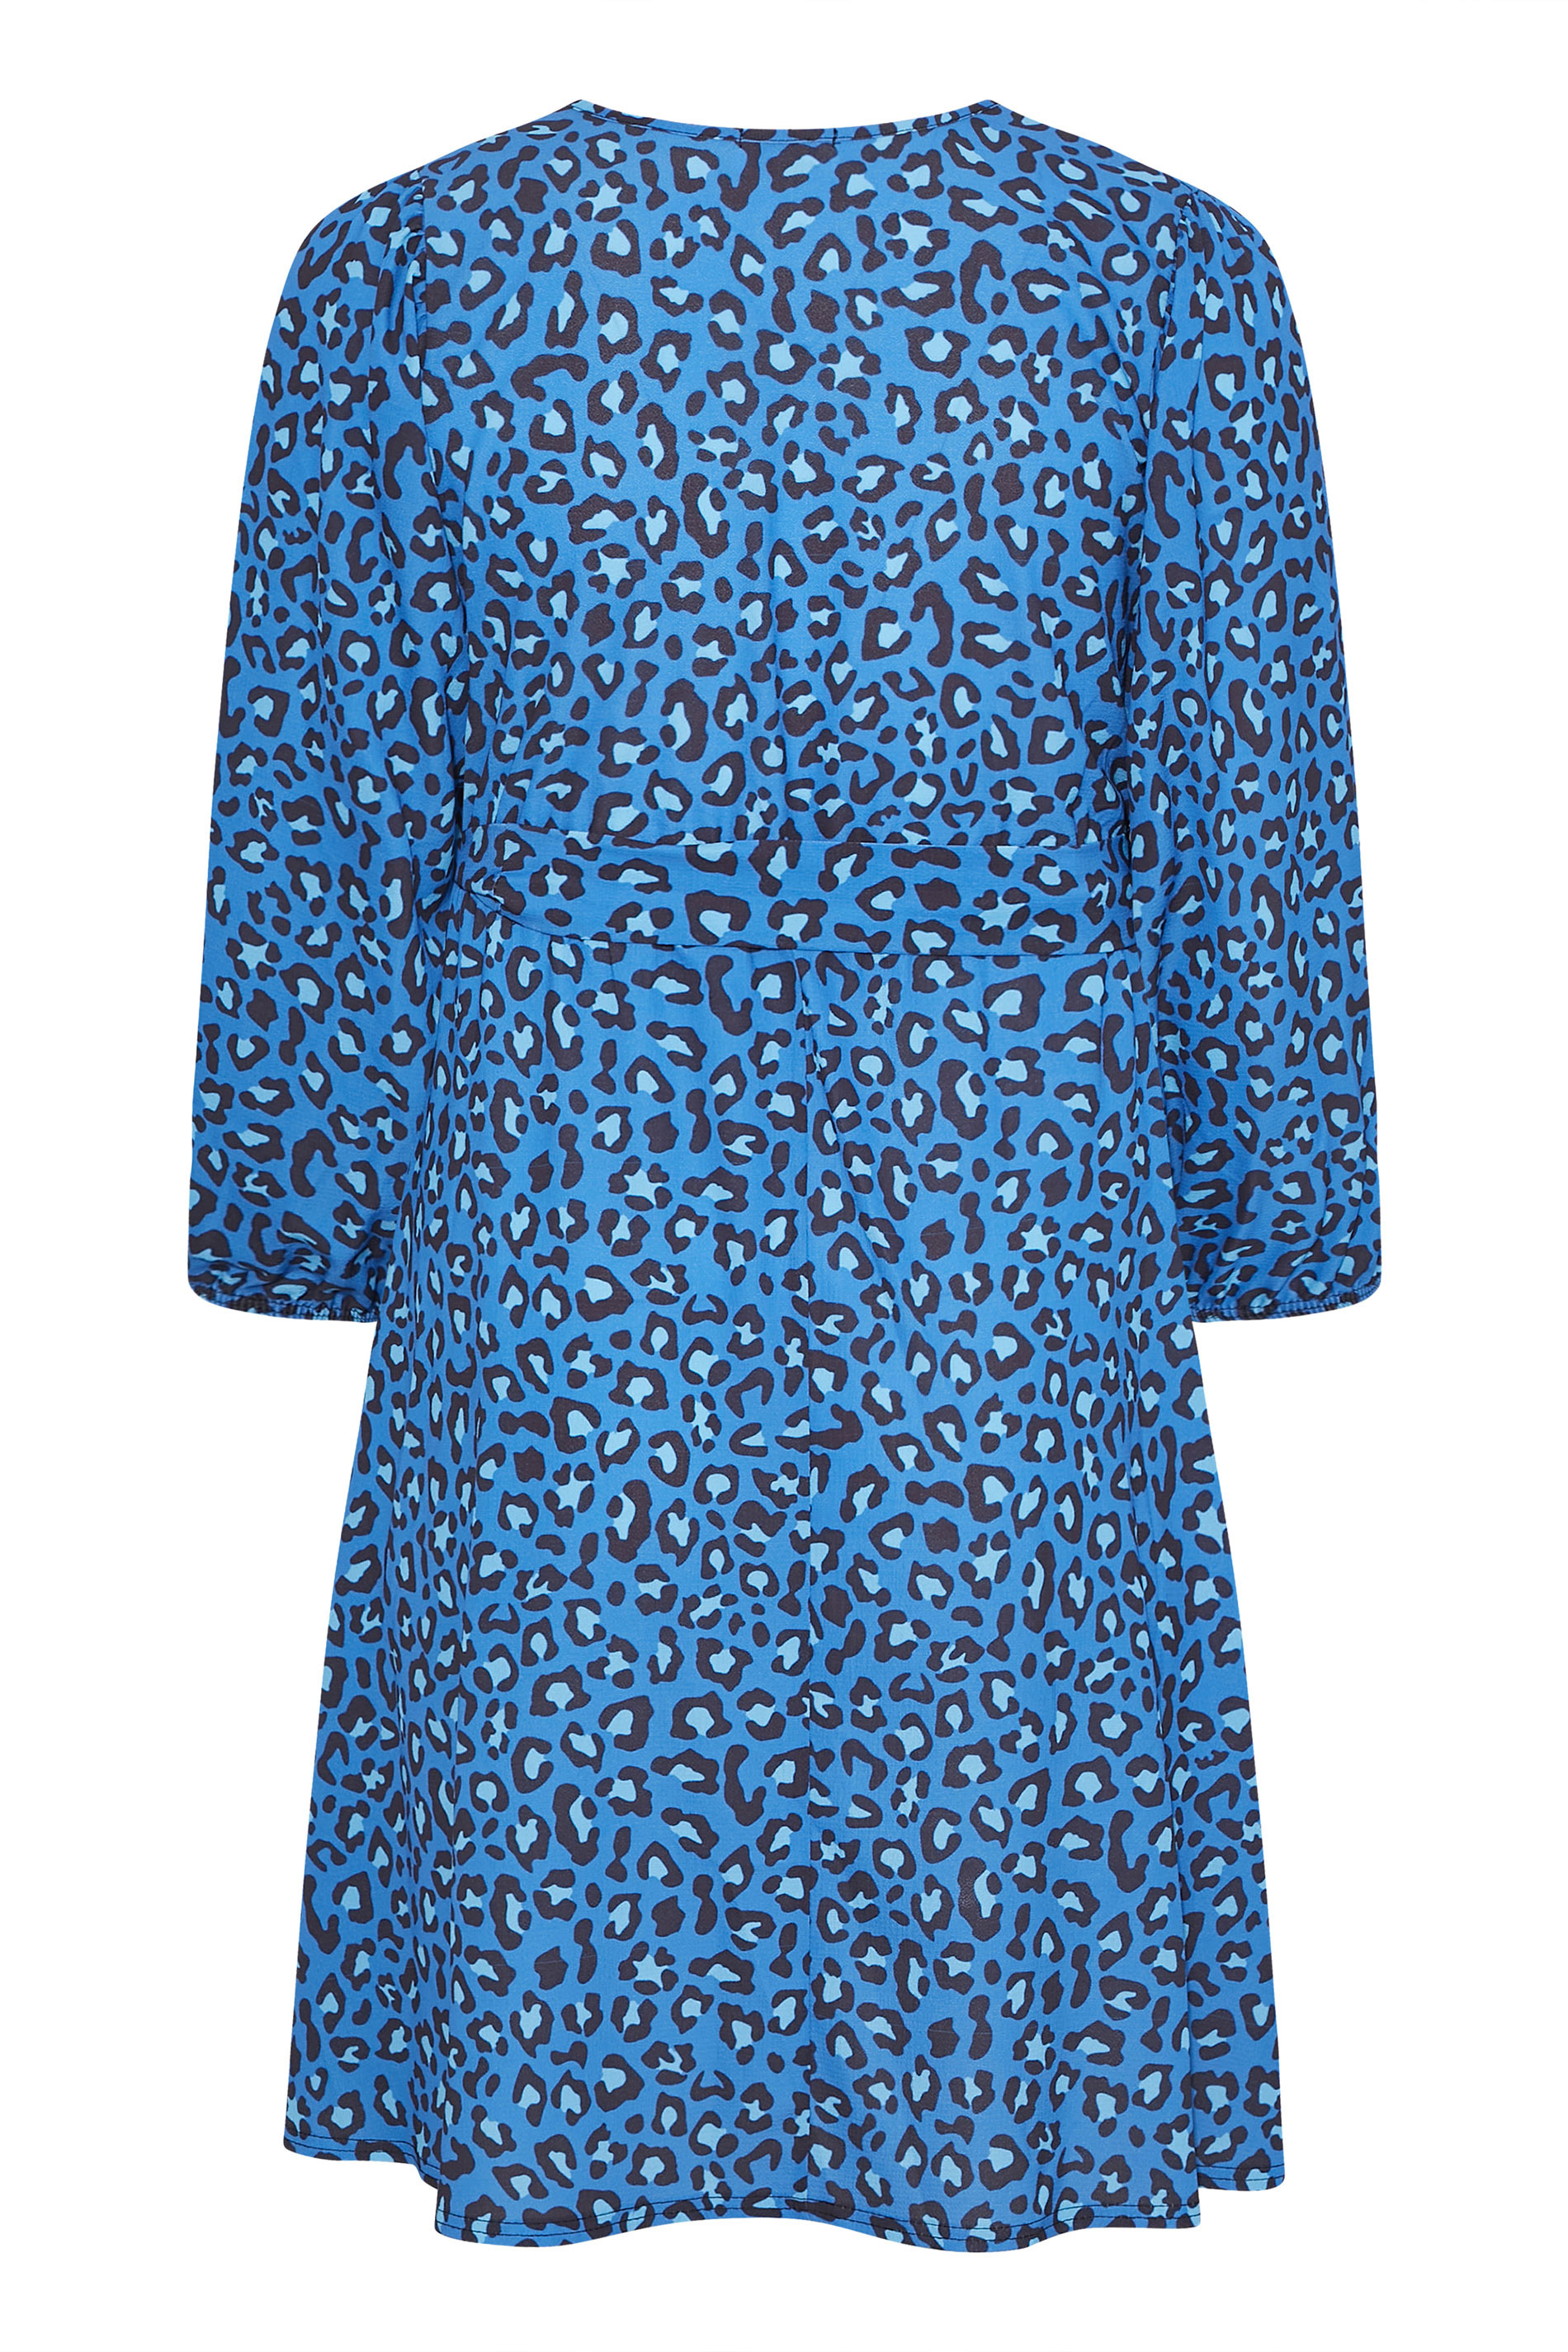 Robes Grande Taille Grande taille  Robes Portefeuilles | YOURS LONDON Curve Blue Leopard Print Wrap Dress - YI18547